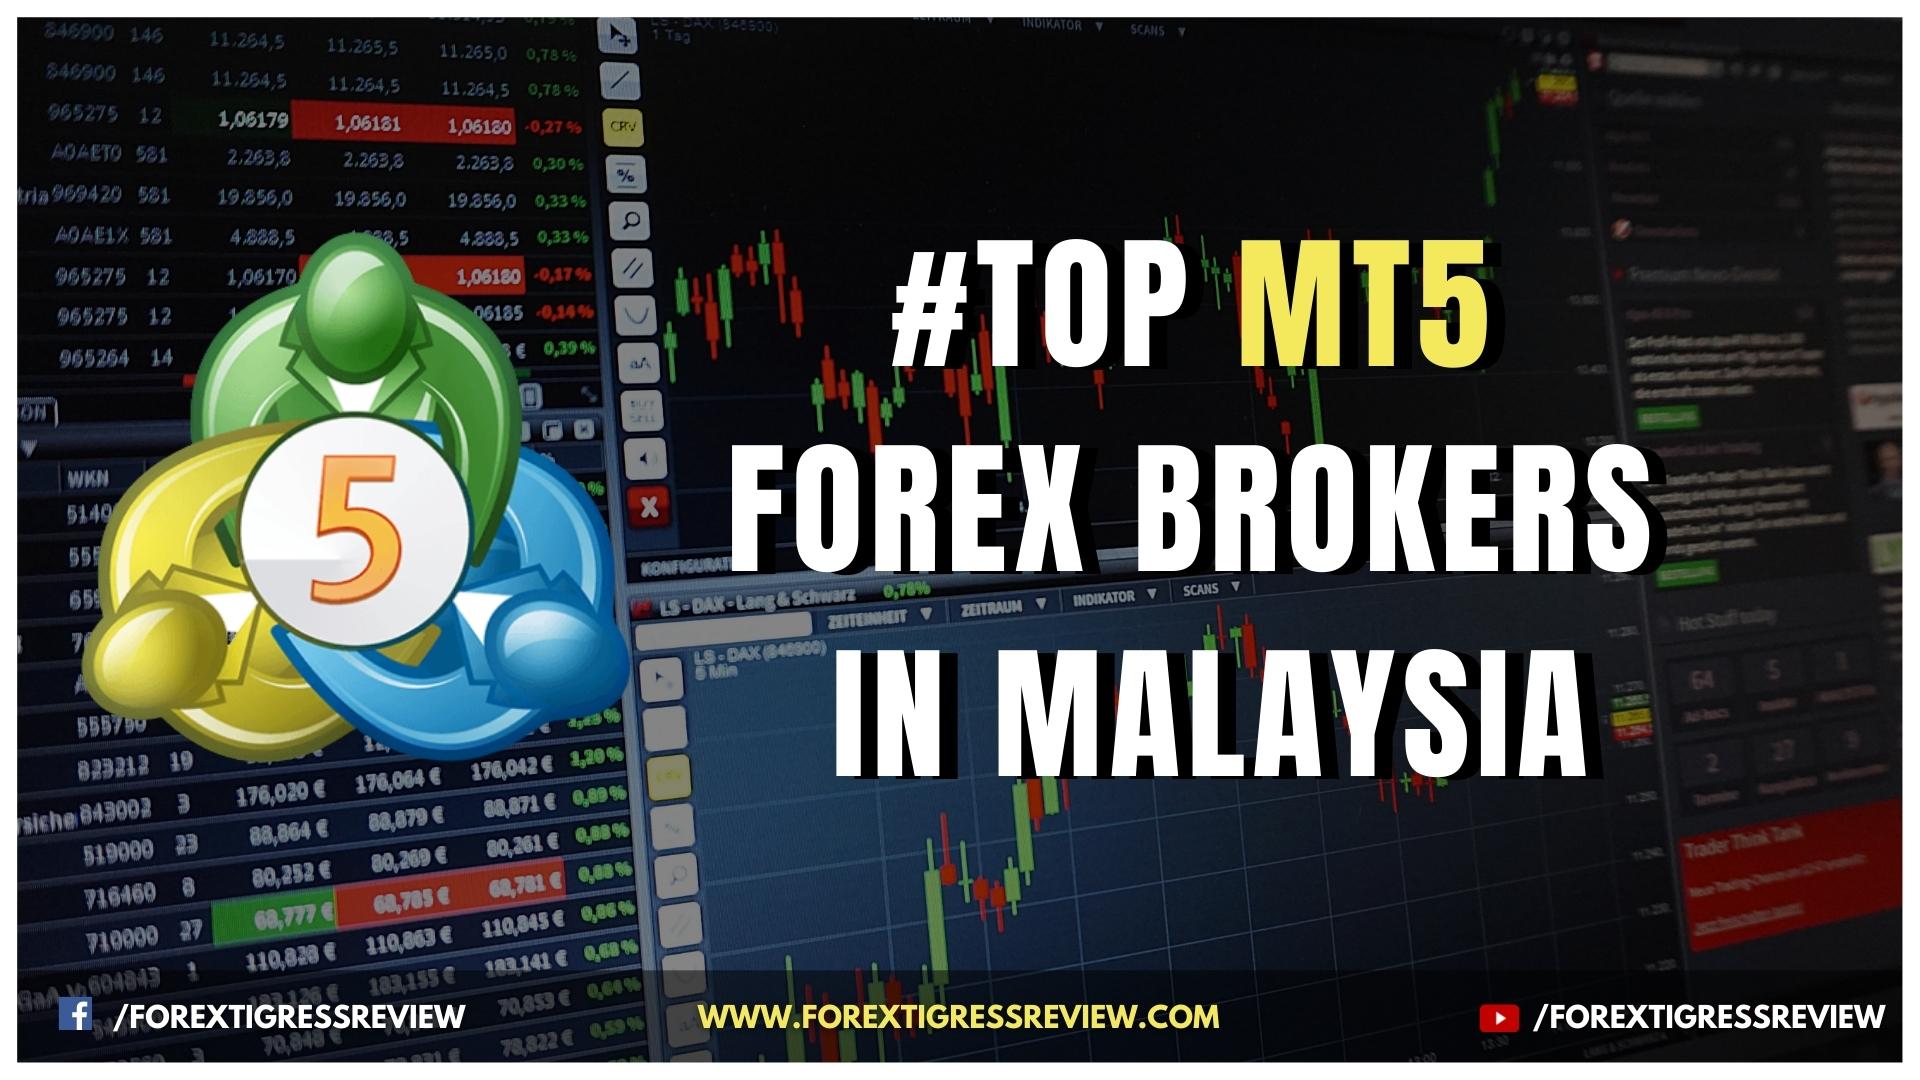 Top MT5 Forex Brokers In Malaysia 2022 Reviews  Forextigressreview